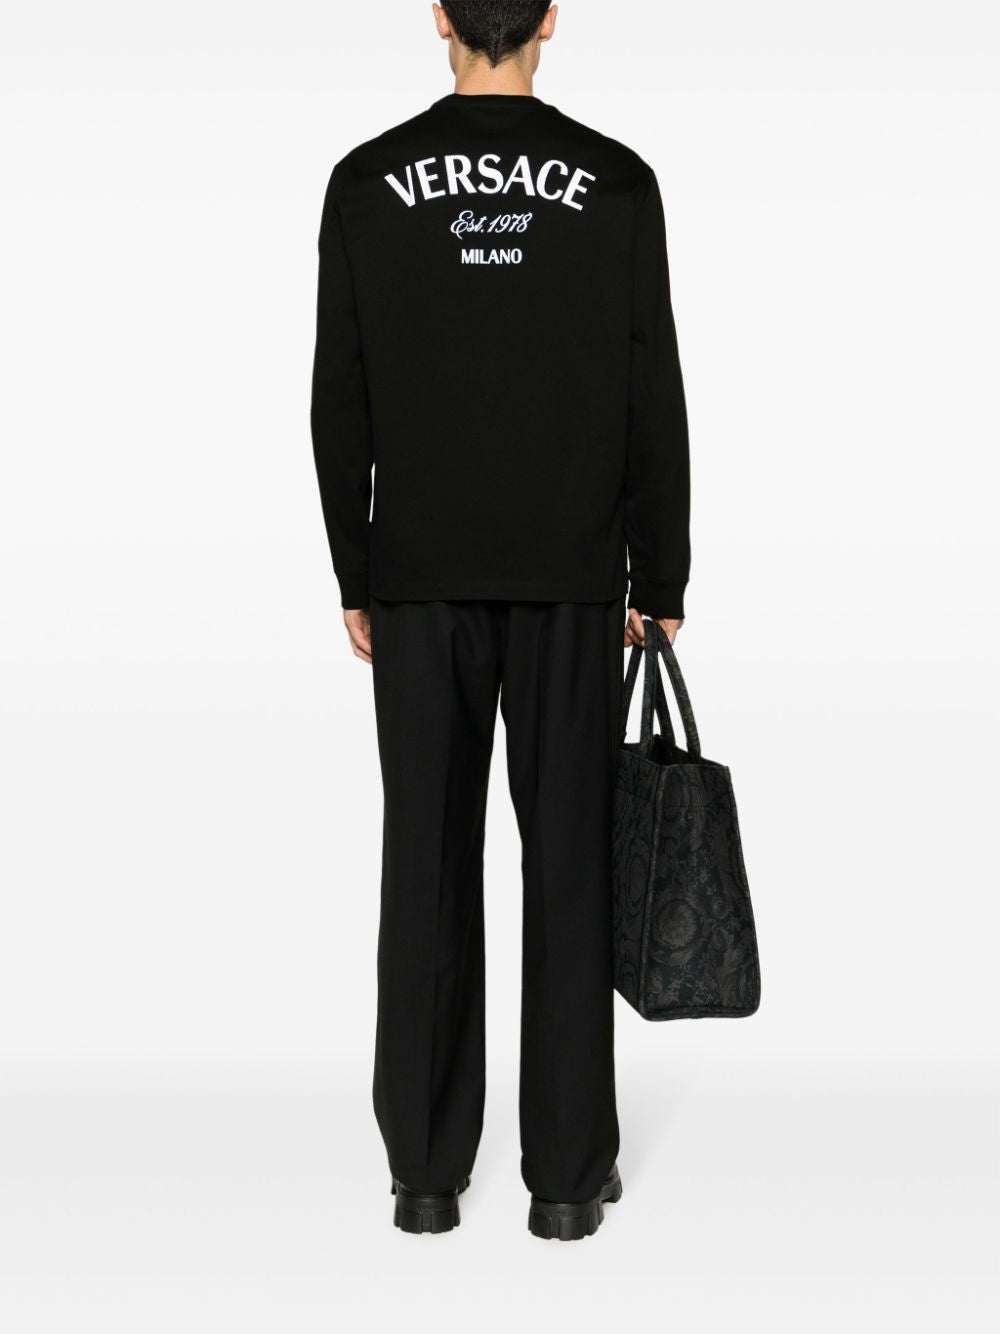 Black Long-Sleeved T-Shirt with Embroidered Versace Design for Men